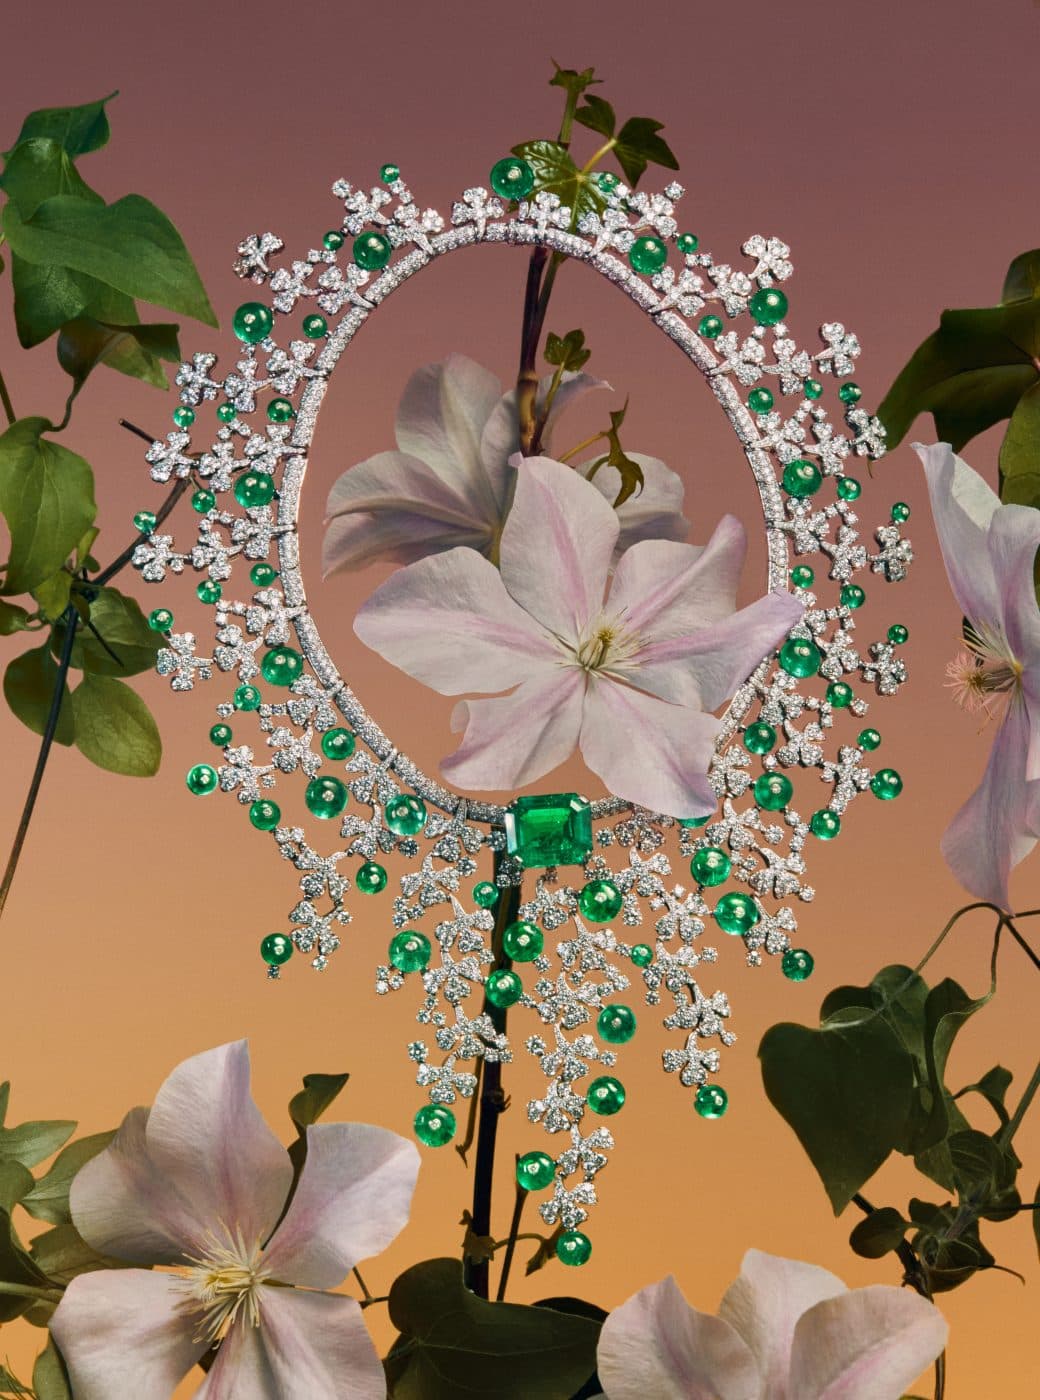 Bulgari necklace of emeralds and diamonds photographed surrounding a flower as seen in Rizzoli book Bvlgari Eden: The Garden of Wonders